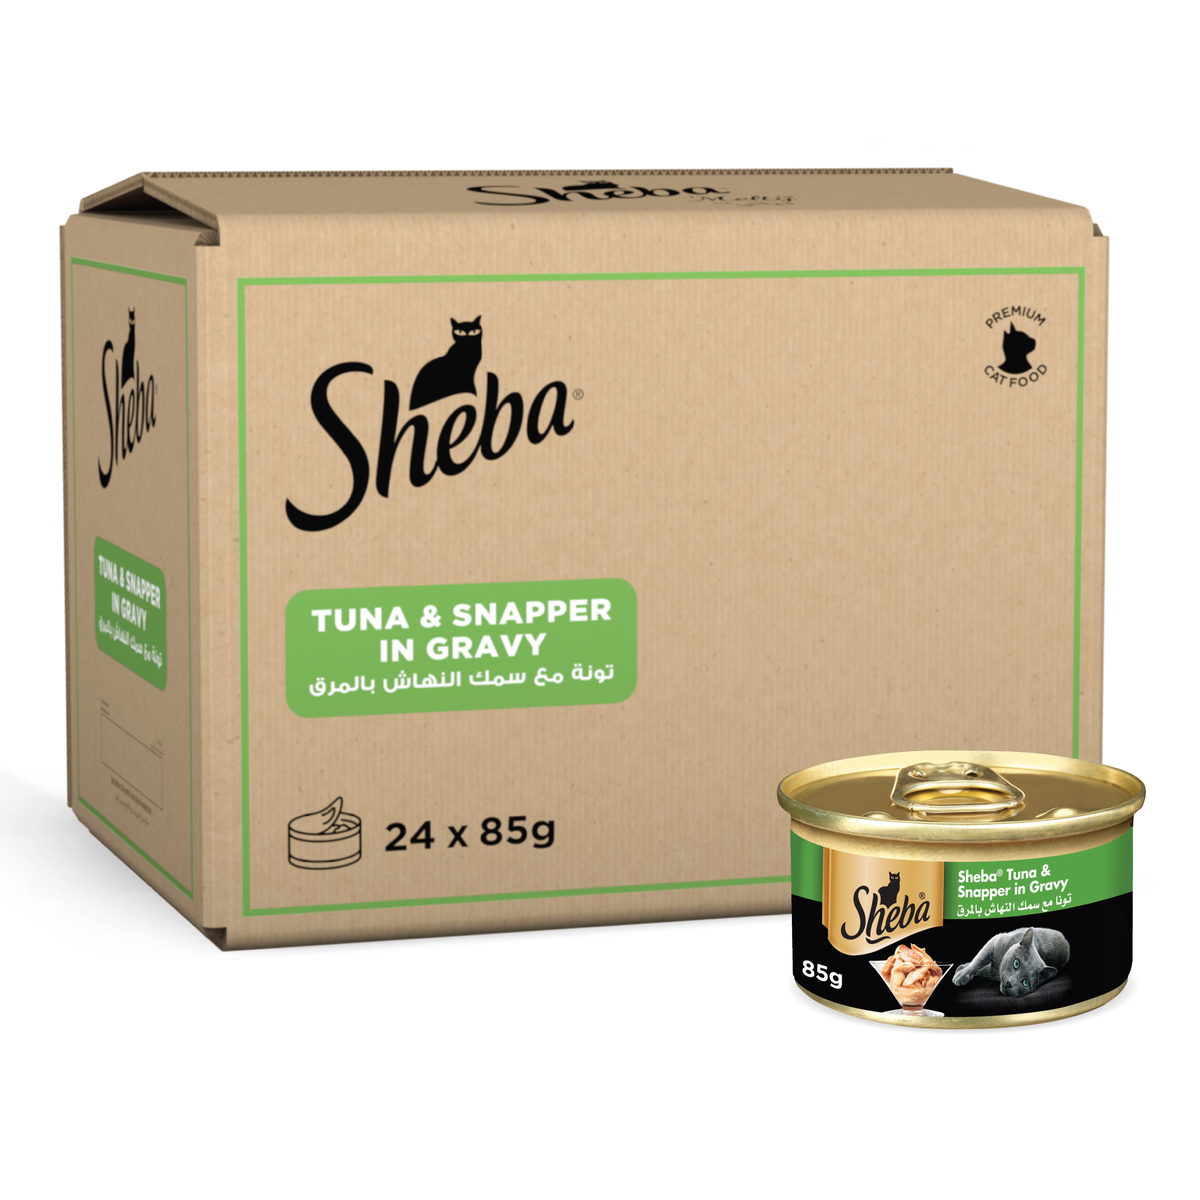 Sheba Tuna White Meat with Snapper Cat Food 85 g